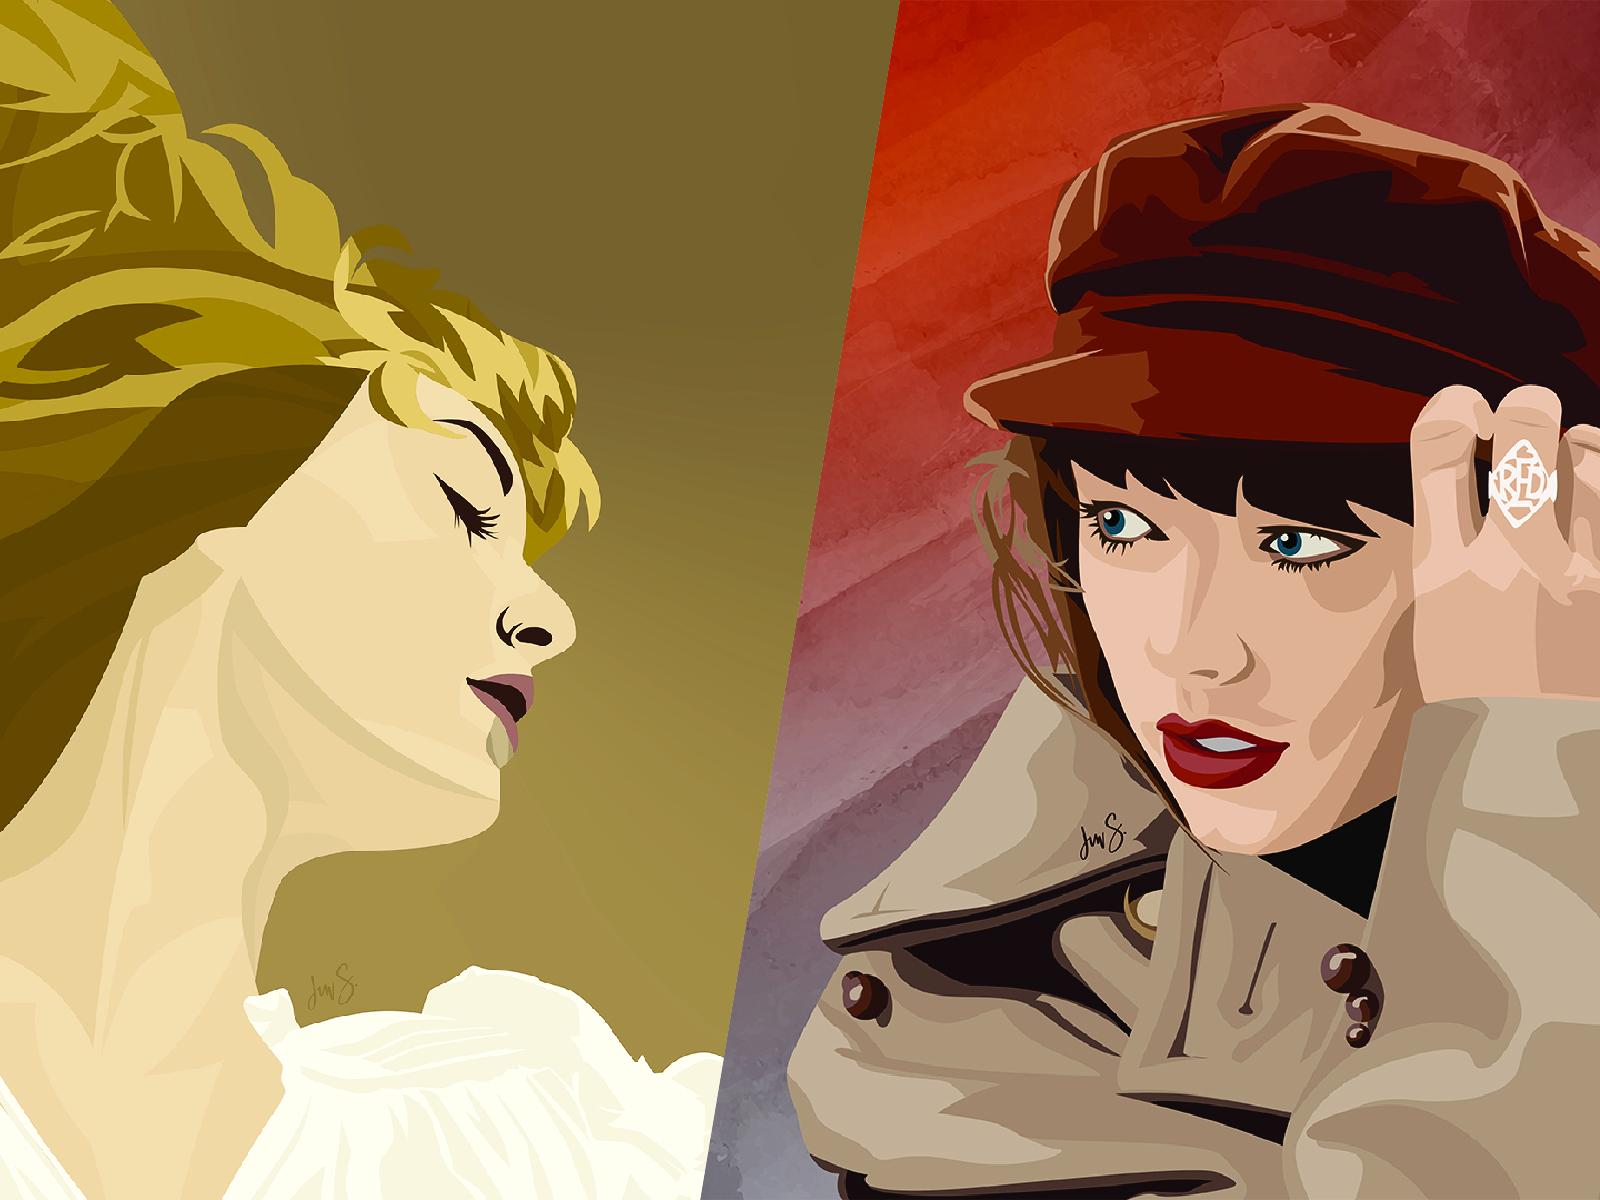 Project Swift: Fearless & Red, Taylor's Versions by JM Santos on Dribbble